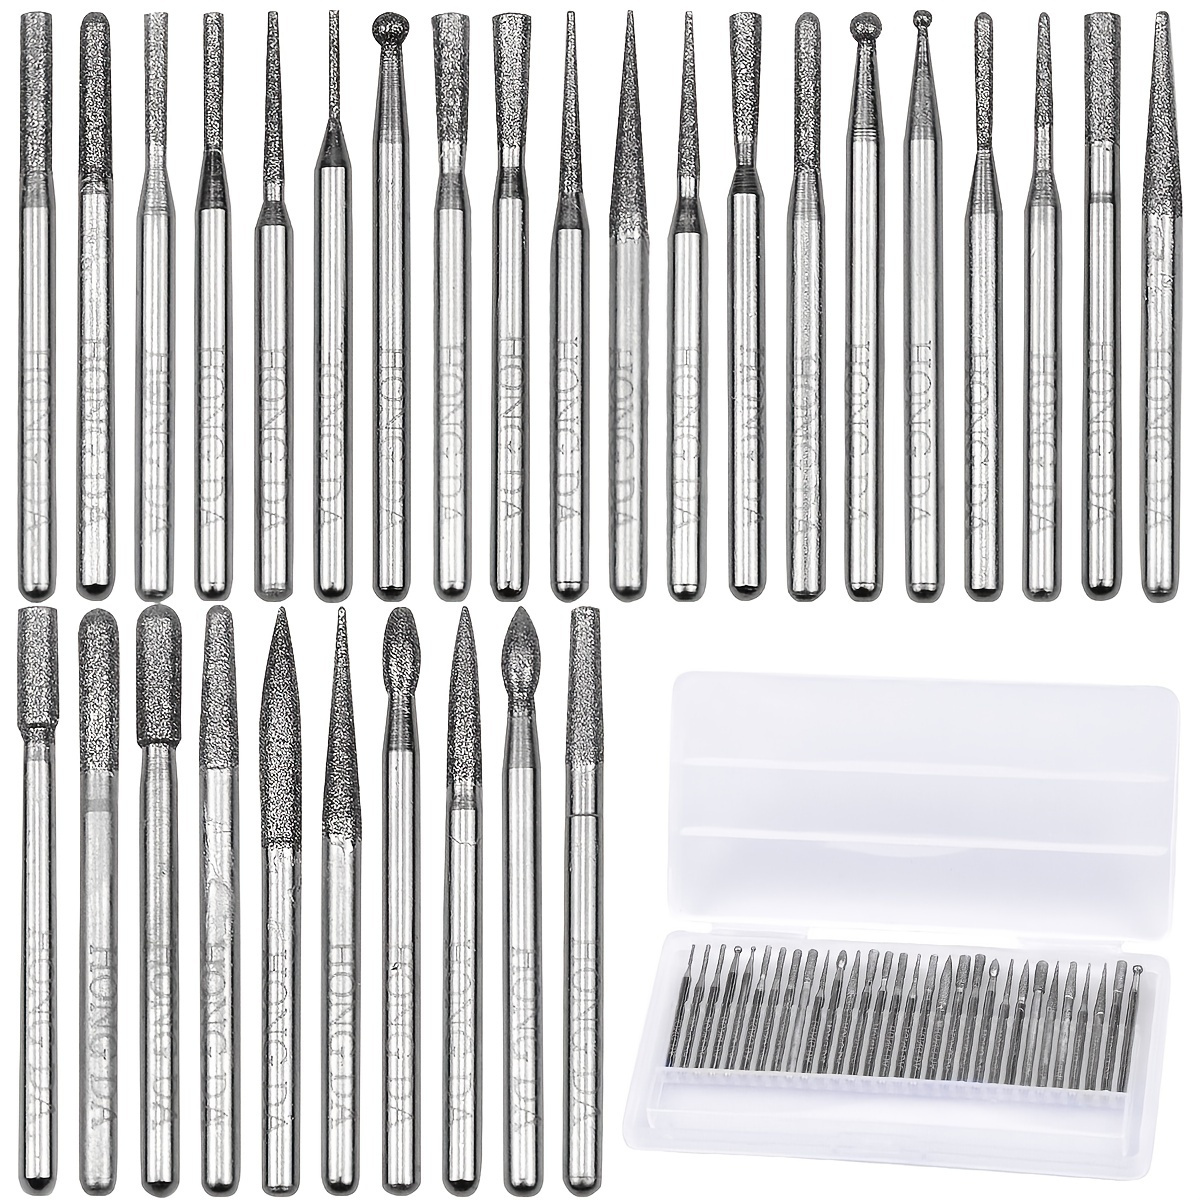 

30pcs Diamond Coated Drill Bit Set: Get Professional Results With Electric Grinder Grinding Head Diamond Drill Bits